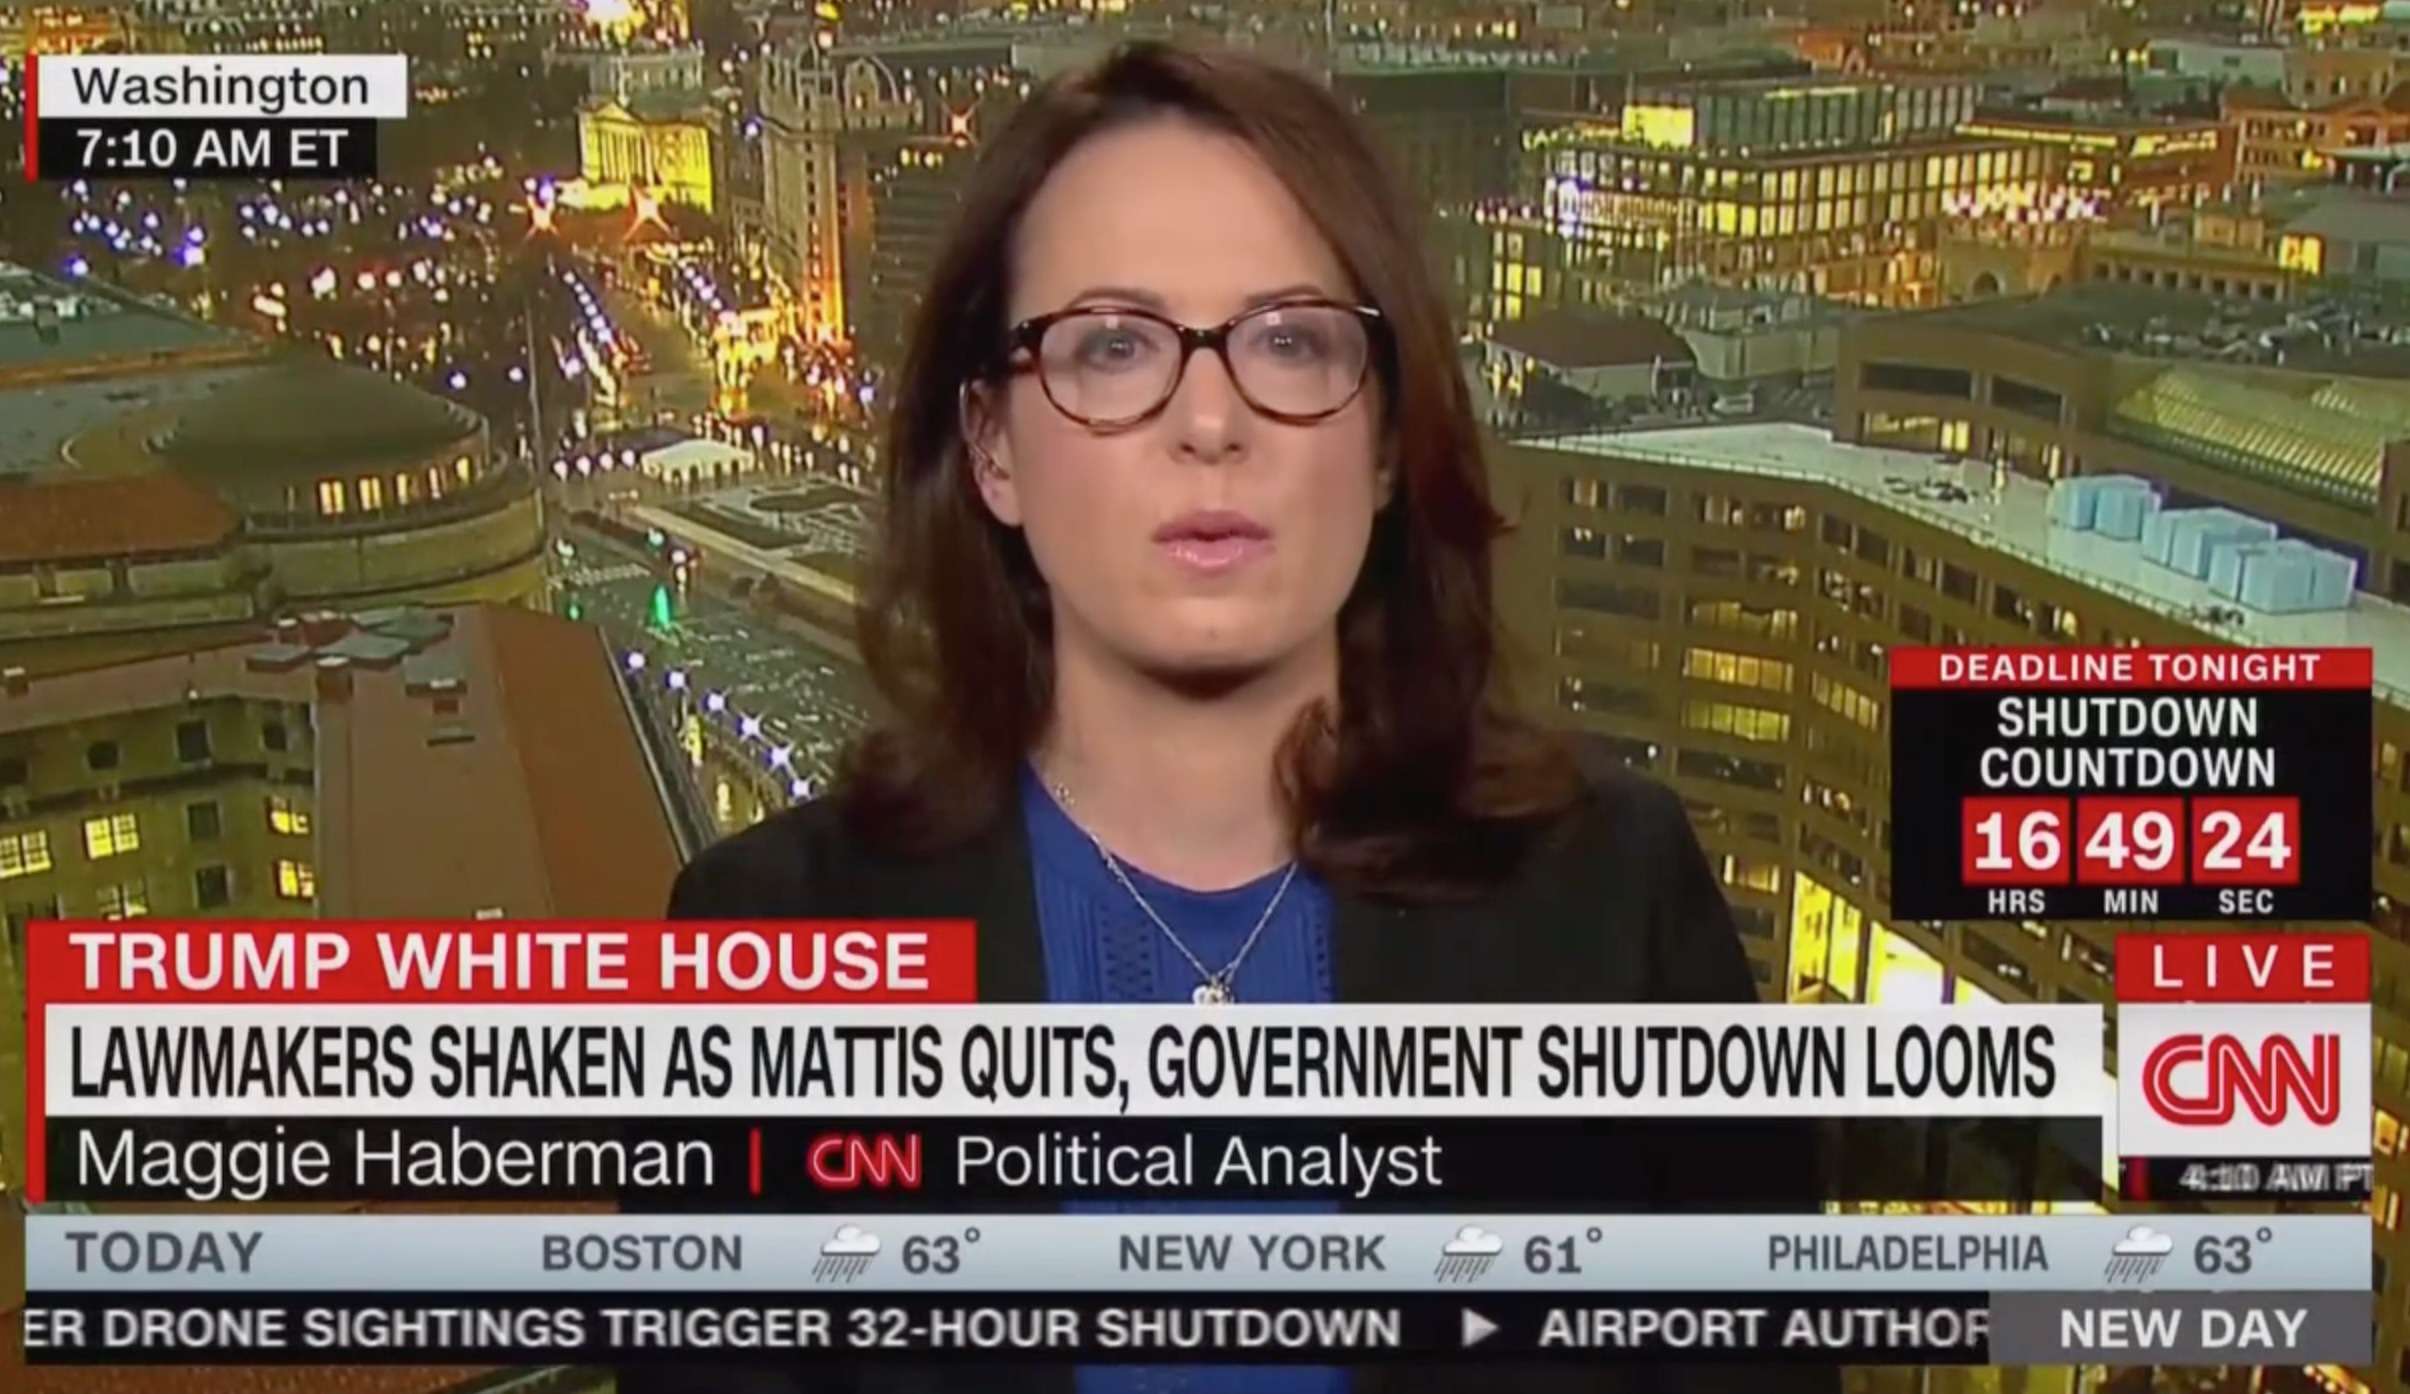 RevContent Ad Example 59392 - Maggie Haberman: 'Disgusted' Republicans Now Privately Admitting They Regret Supporting Trump